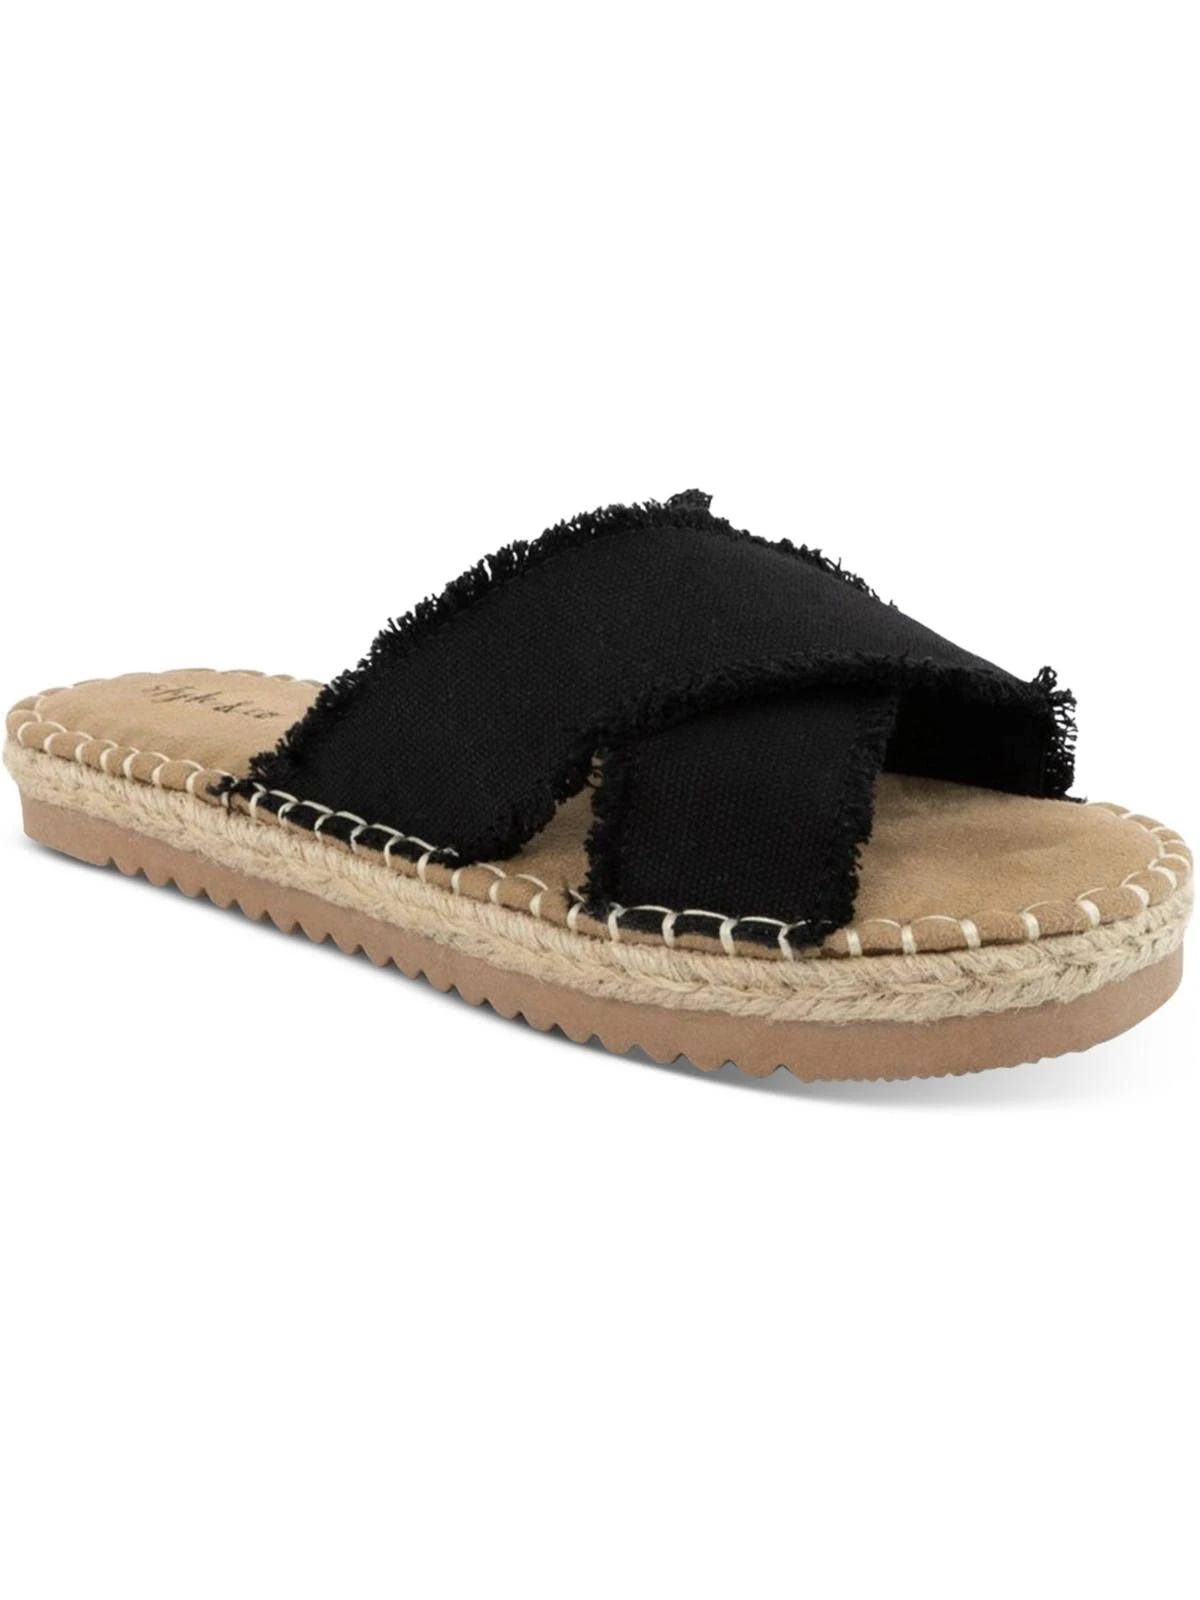 Affordable women's chic criss-cross slide sandals in black canvas | Image